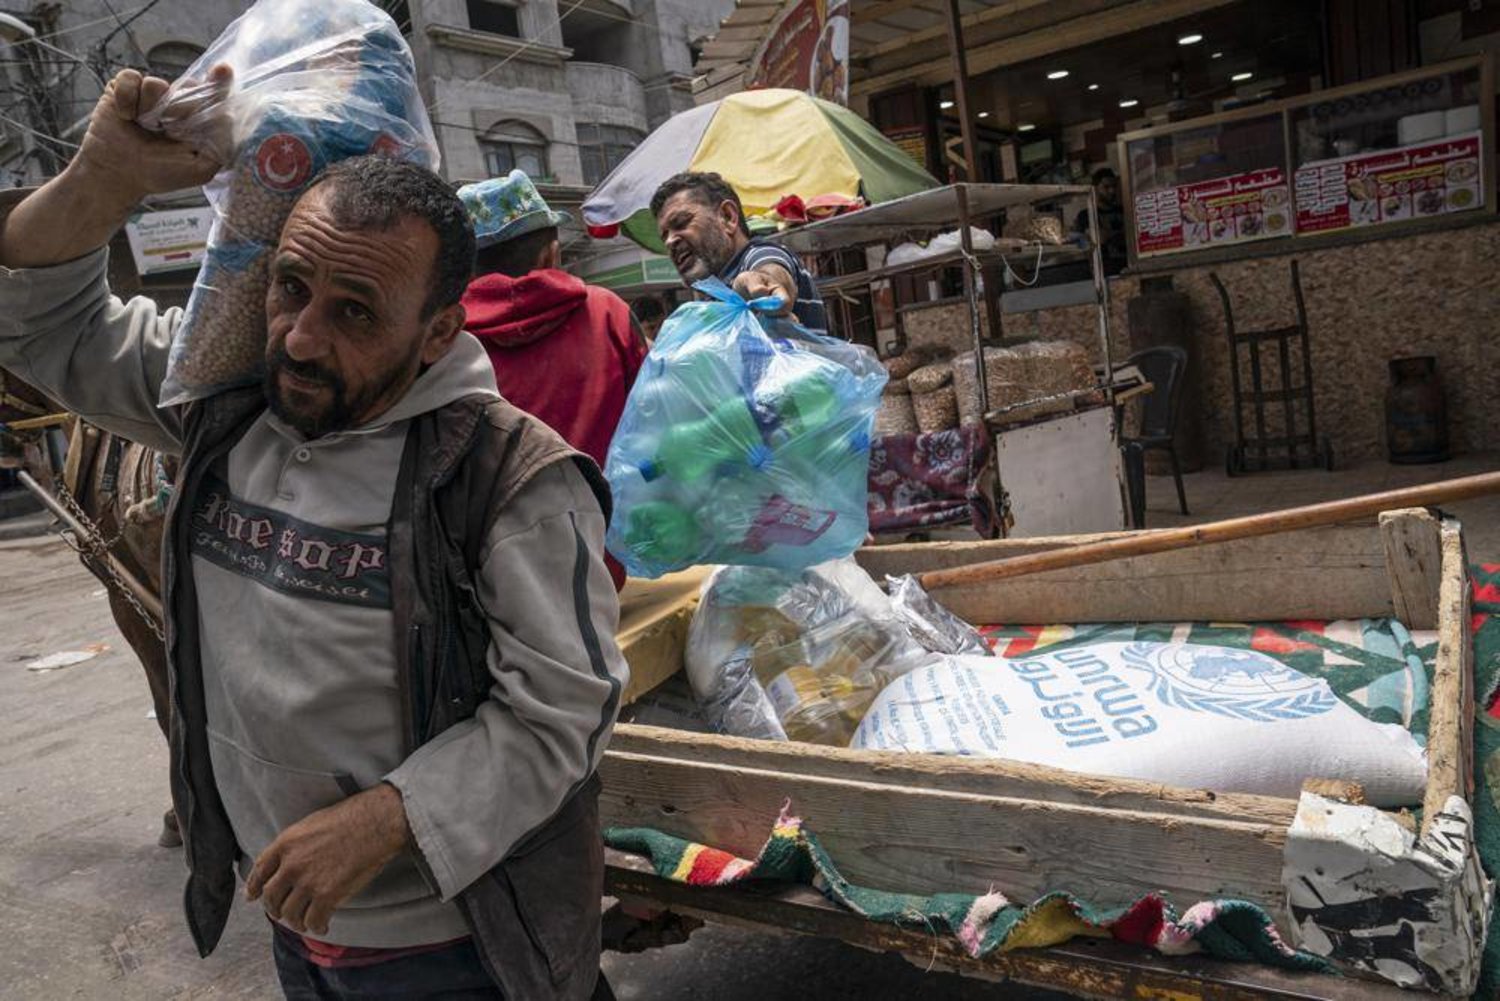 FILE - A bag of foodstuffs provided by the UN agency for Palestinian refugees (UNRWA) lies in a cart as Palestinians collect food aid following a cease-fire reached after an 11-day war between Gaza's Hamas rulers and Israel, in Gaza City, May 22, 2021.  (AP Photo/John Minchillo, File)

